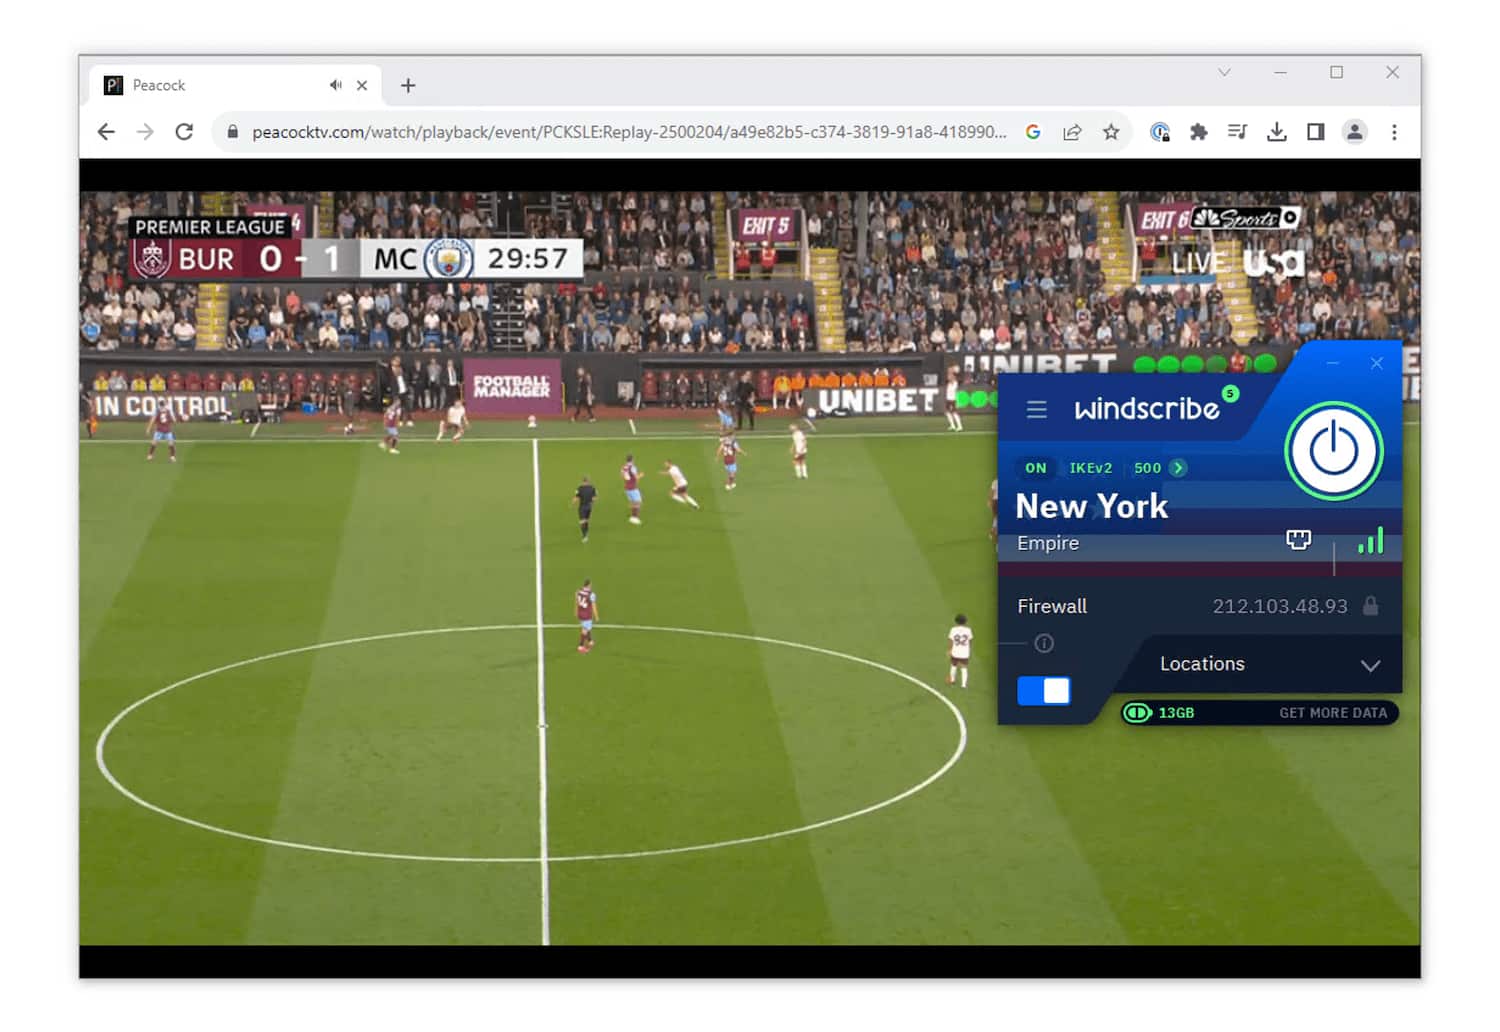 5 Best tips about Hesgoal UK Football Streaming 